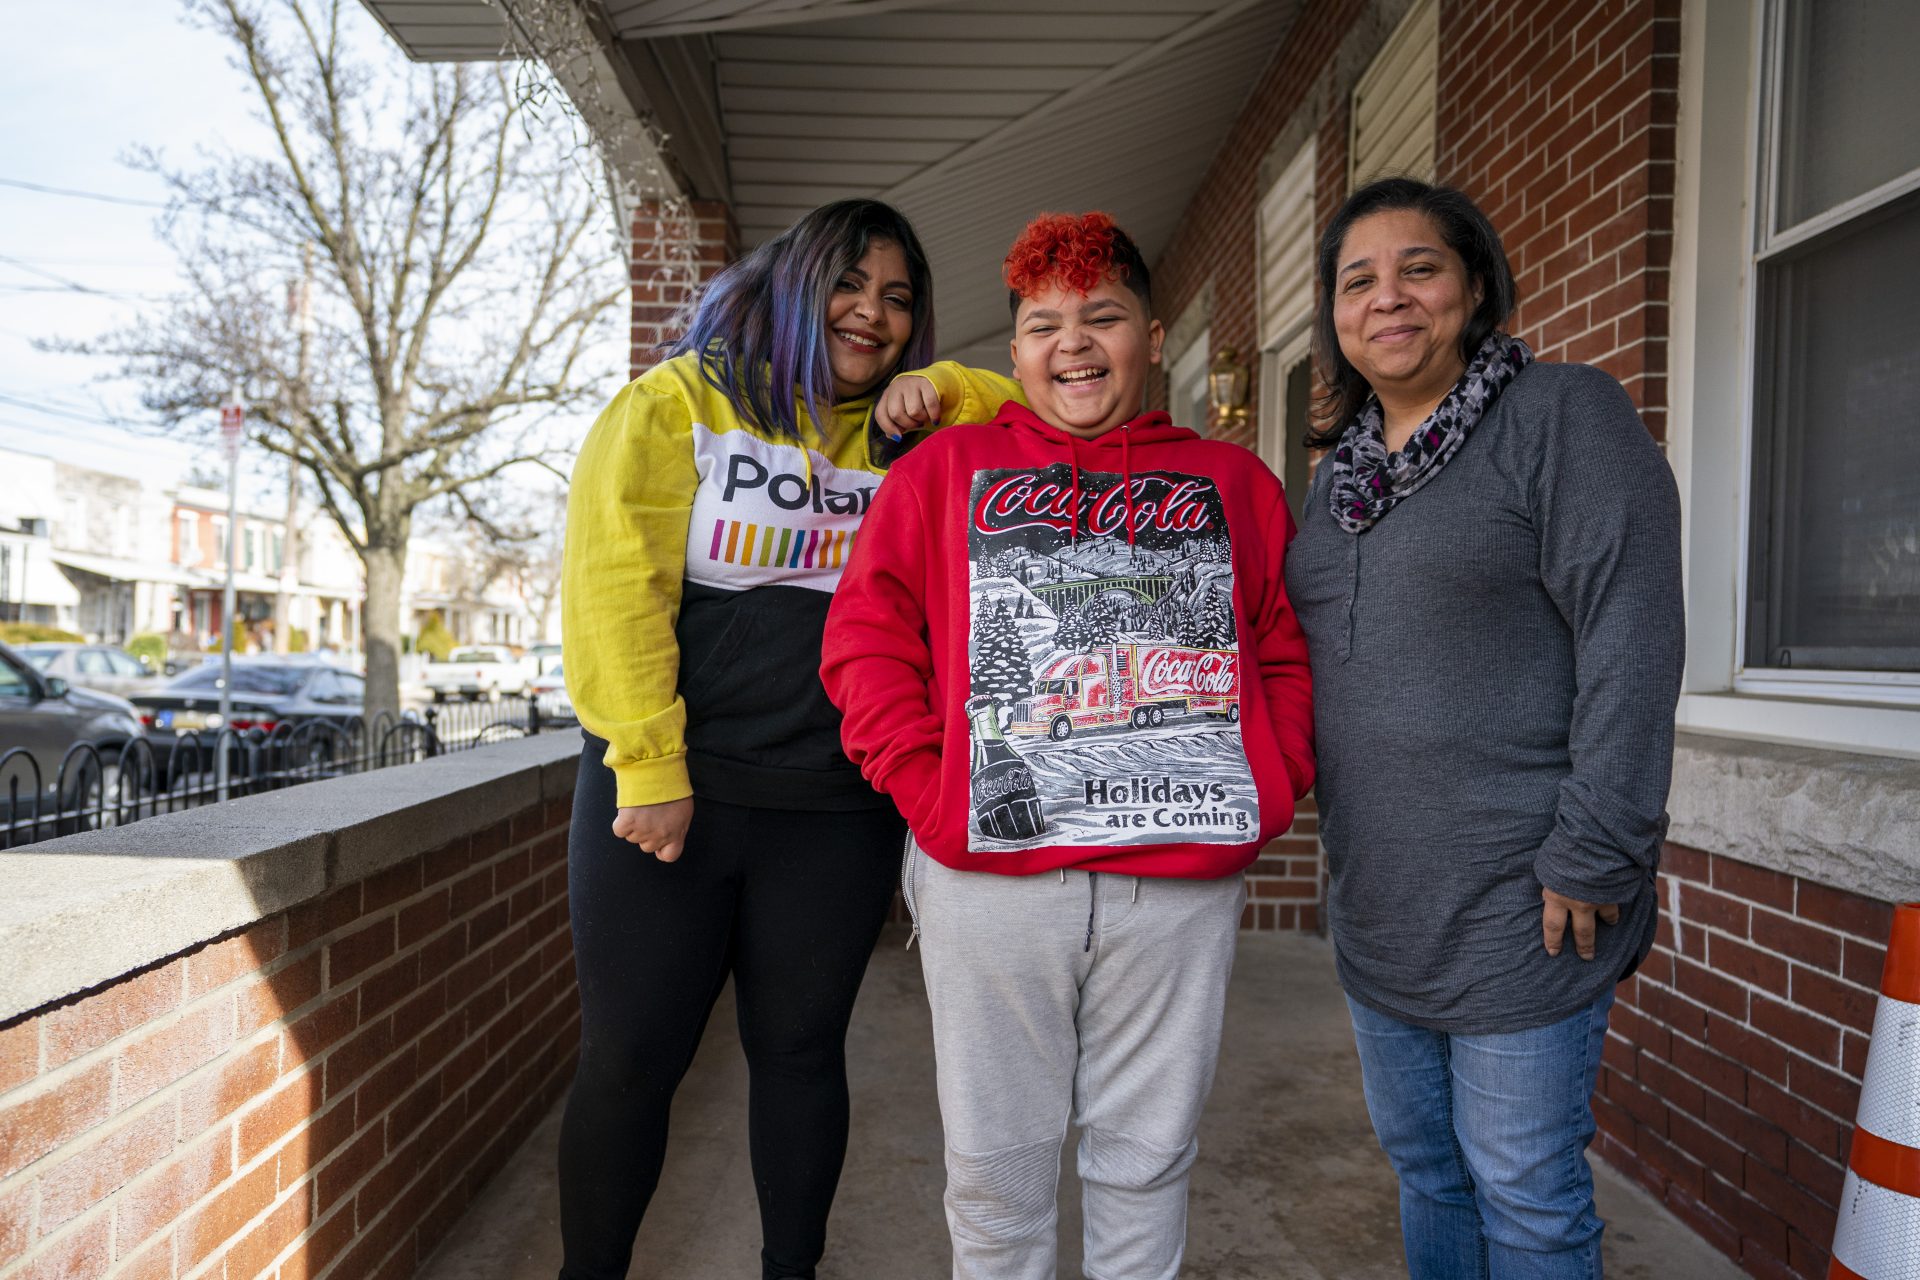 Yali Perez (left), her son Ian and her mother Brenda Santiago on their porch in Bridesburg. Although still wary, Yali says she has a "love affair" with the neighborhood because of its lack of crime.